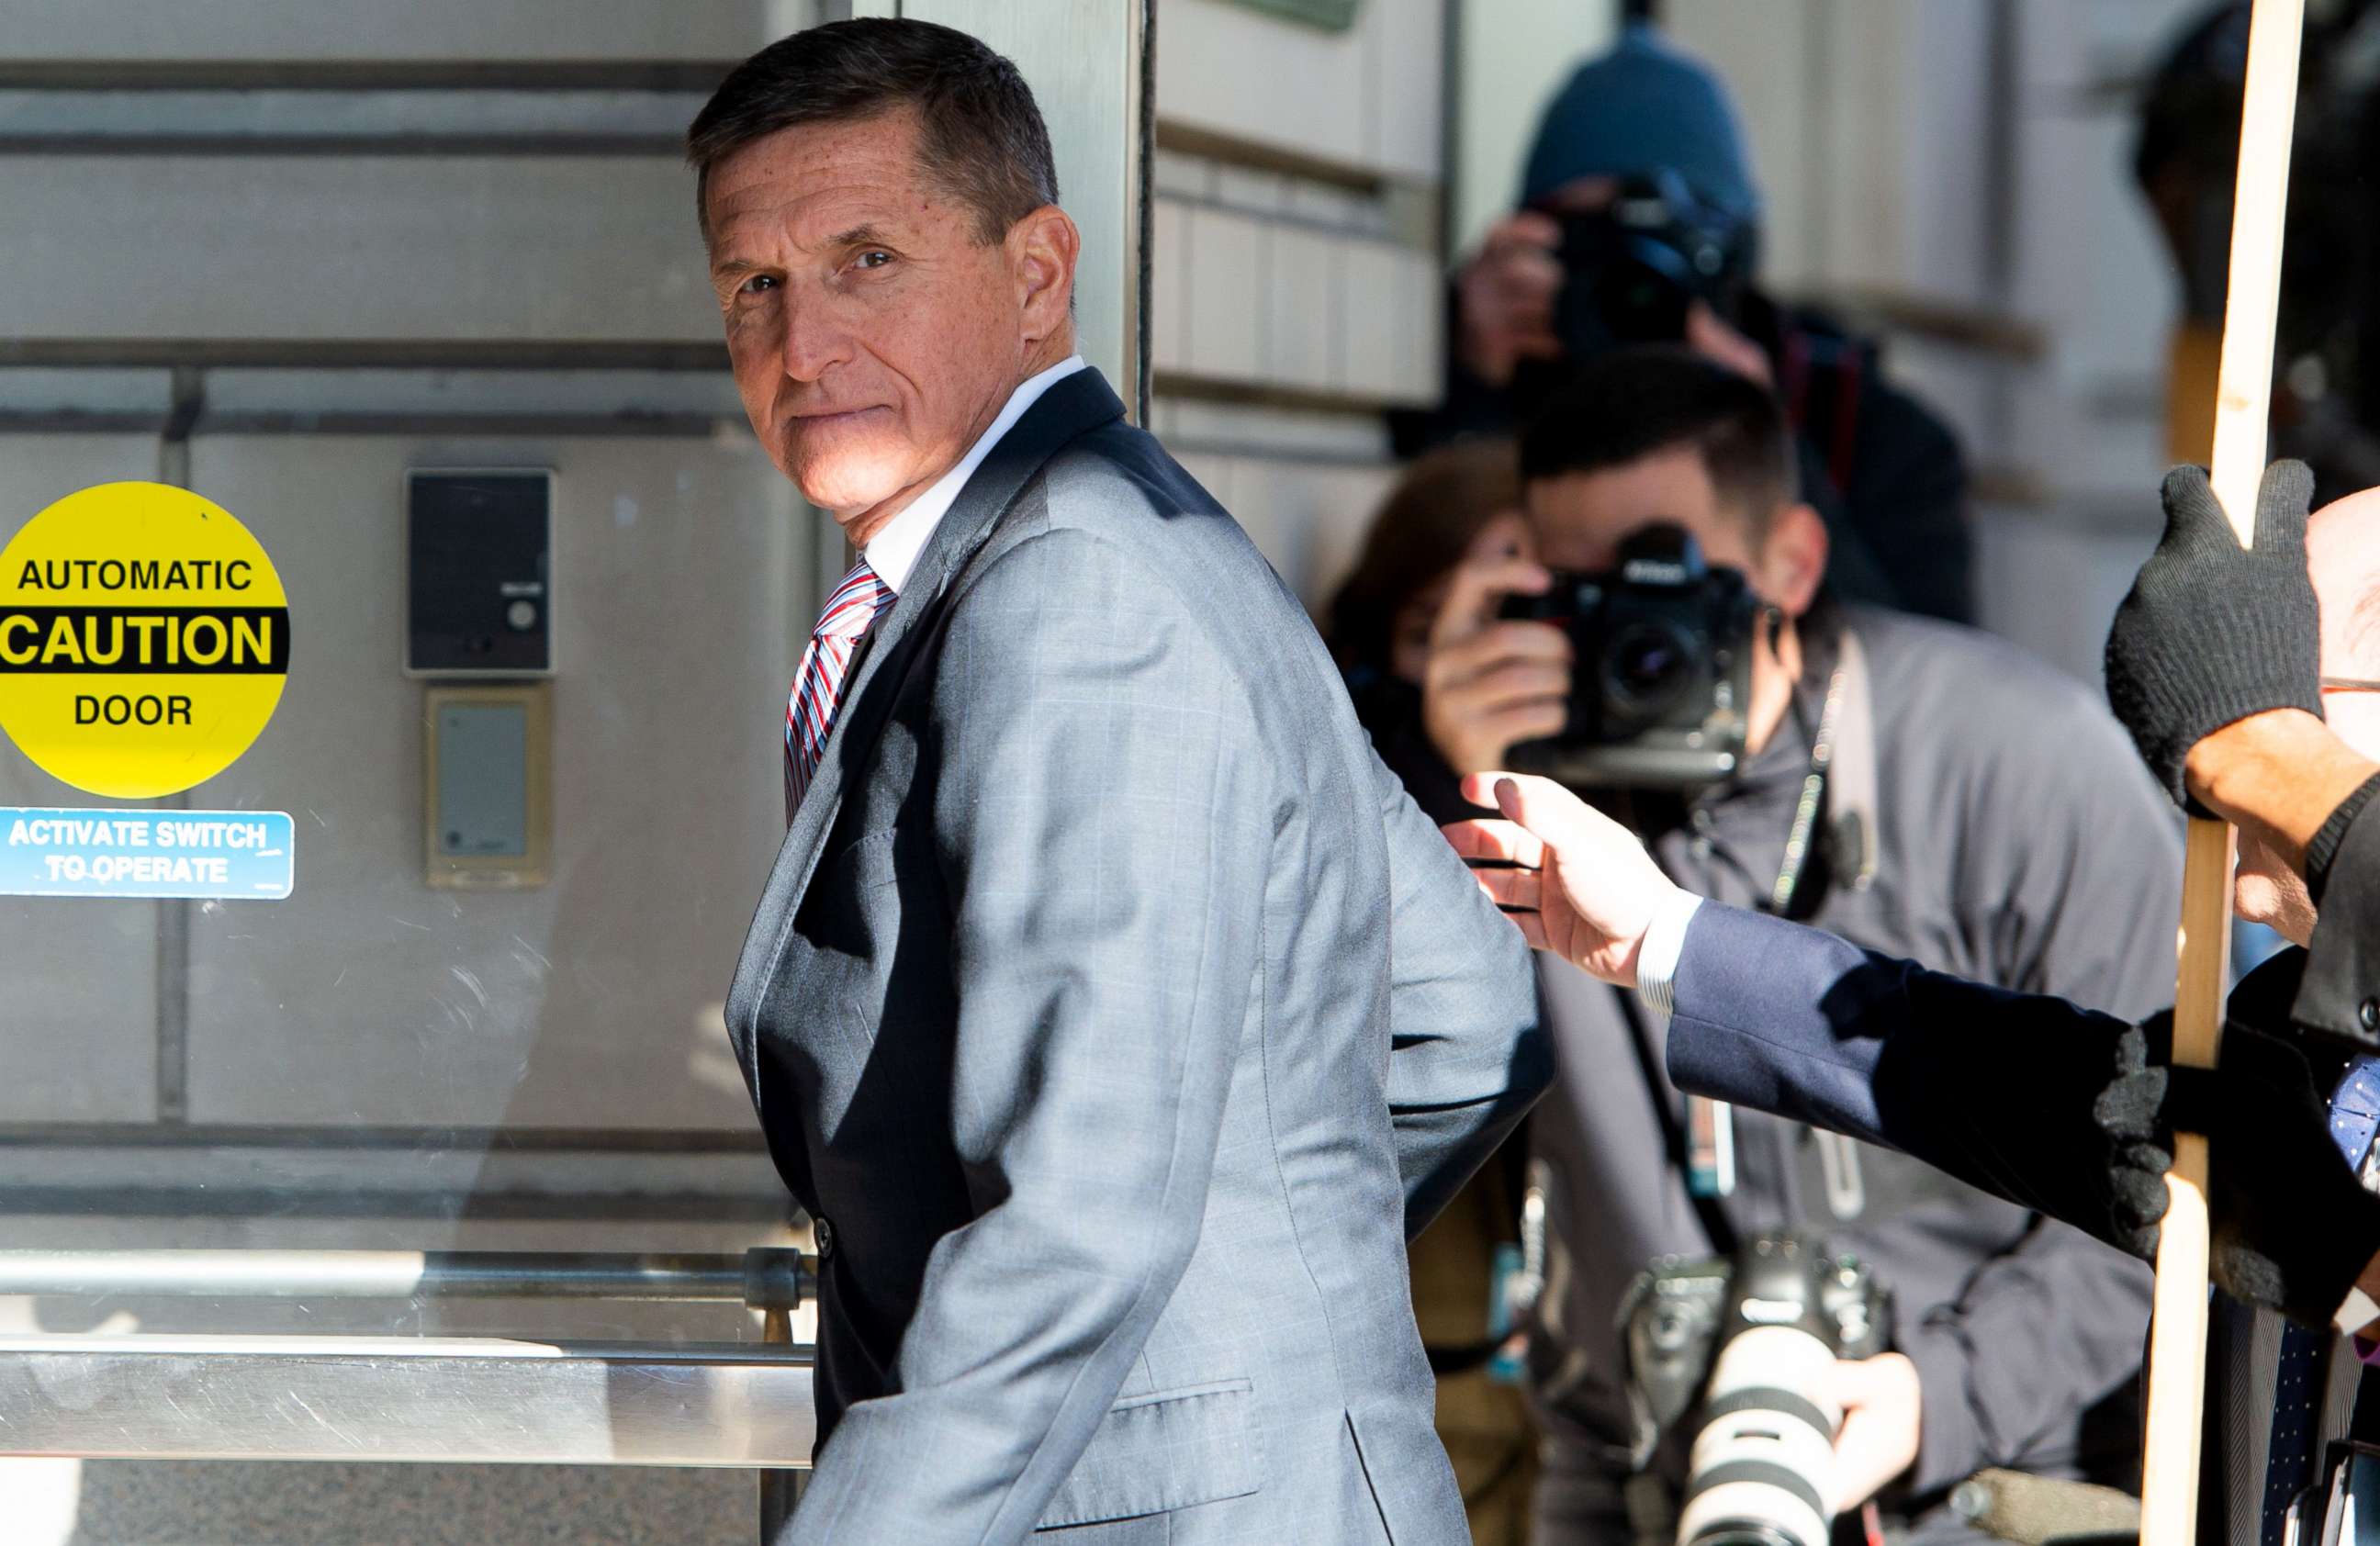 PHOTO: Former US national security advisor general Michael Flynn arrives for his sentencing hearing at US District Court in Washington, Dec. 18, 2018.